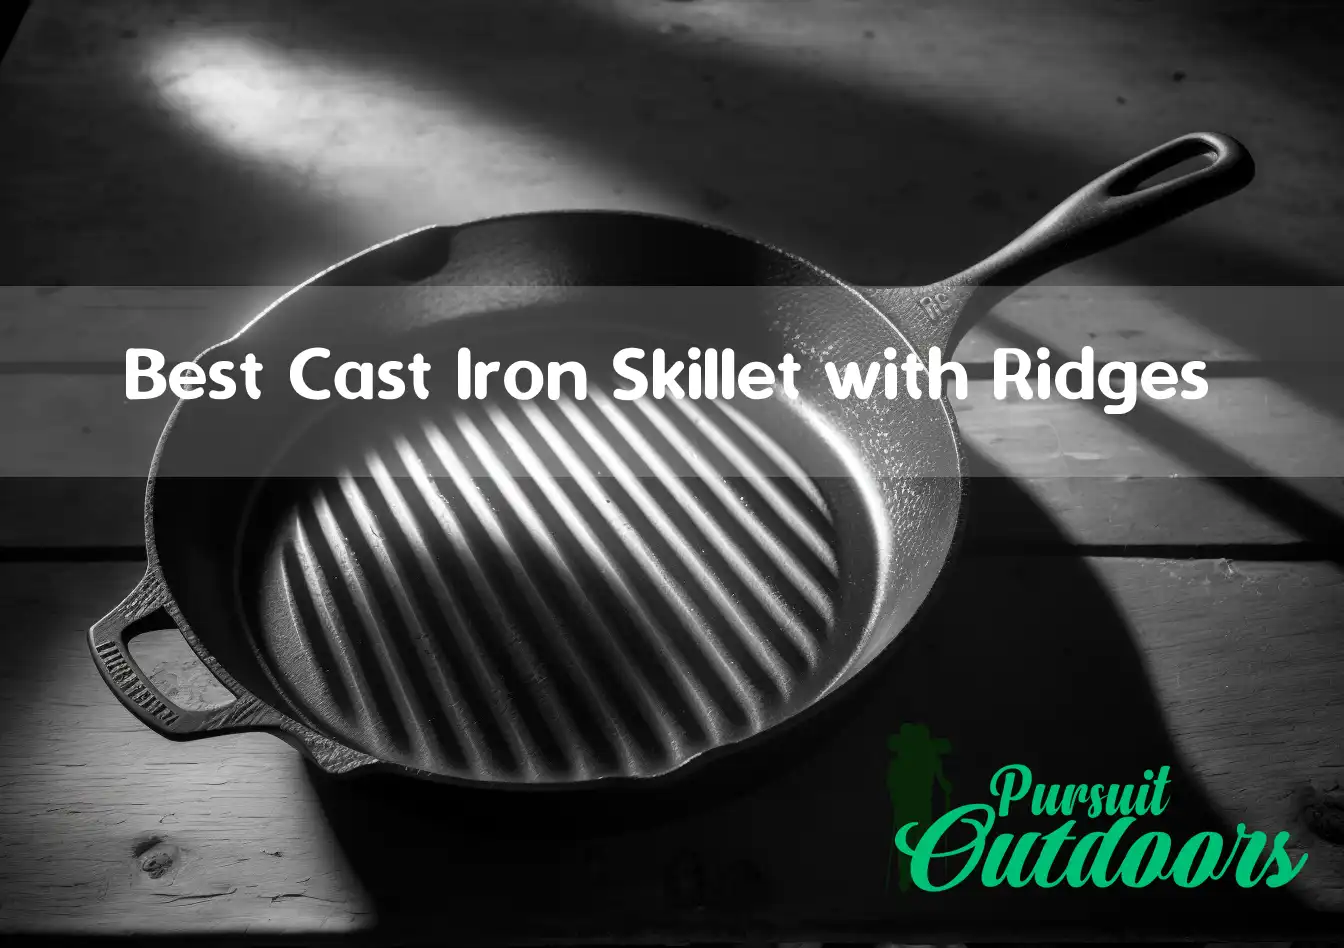 Cast Iron Skillet with Ridges – Top Picks and Reviews